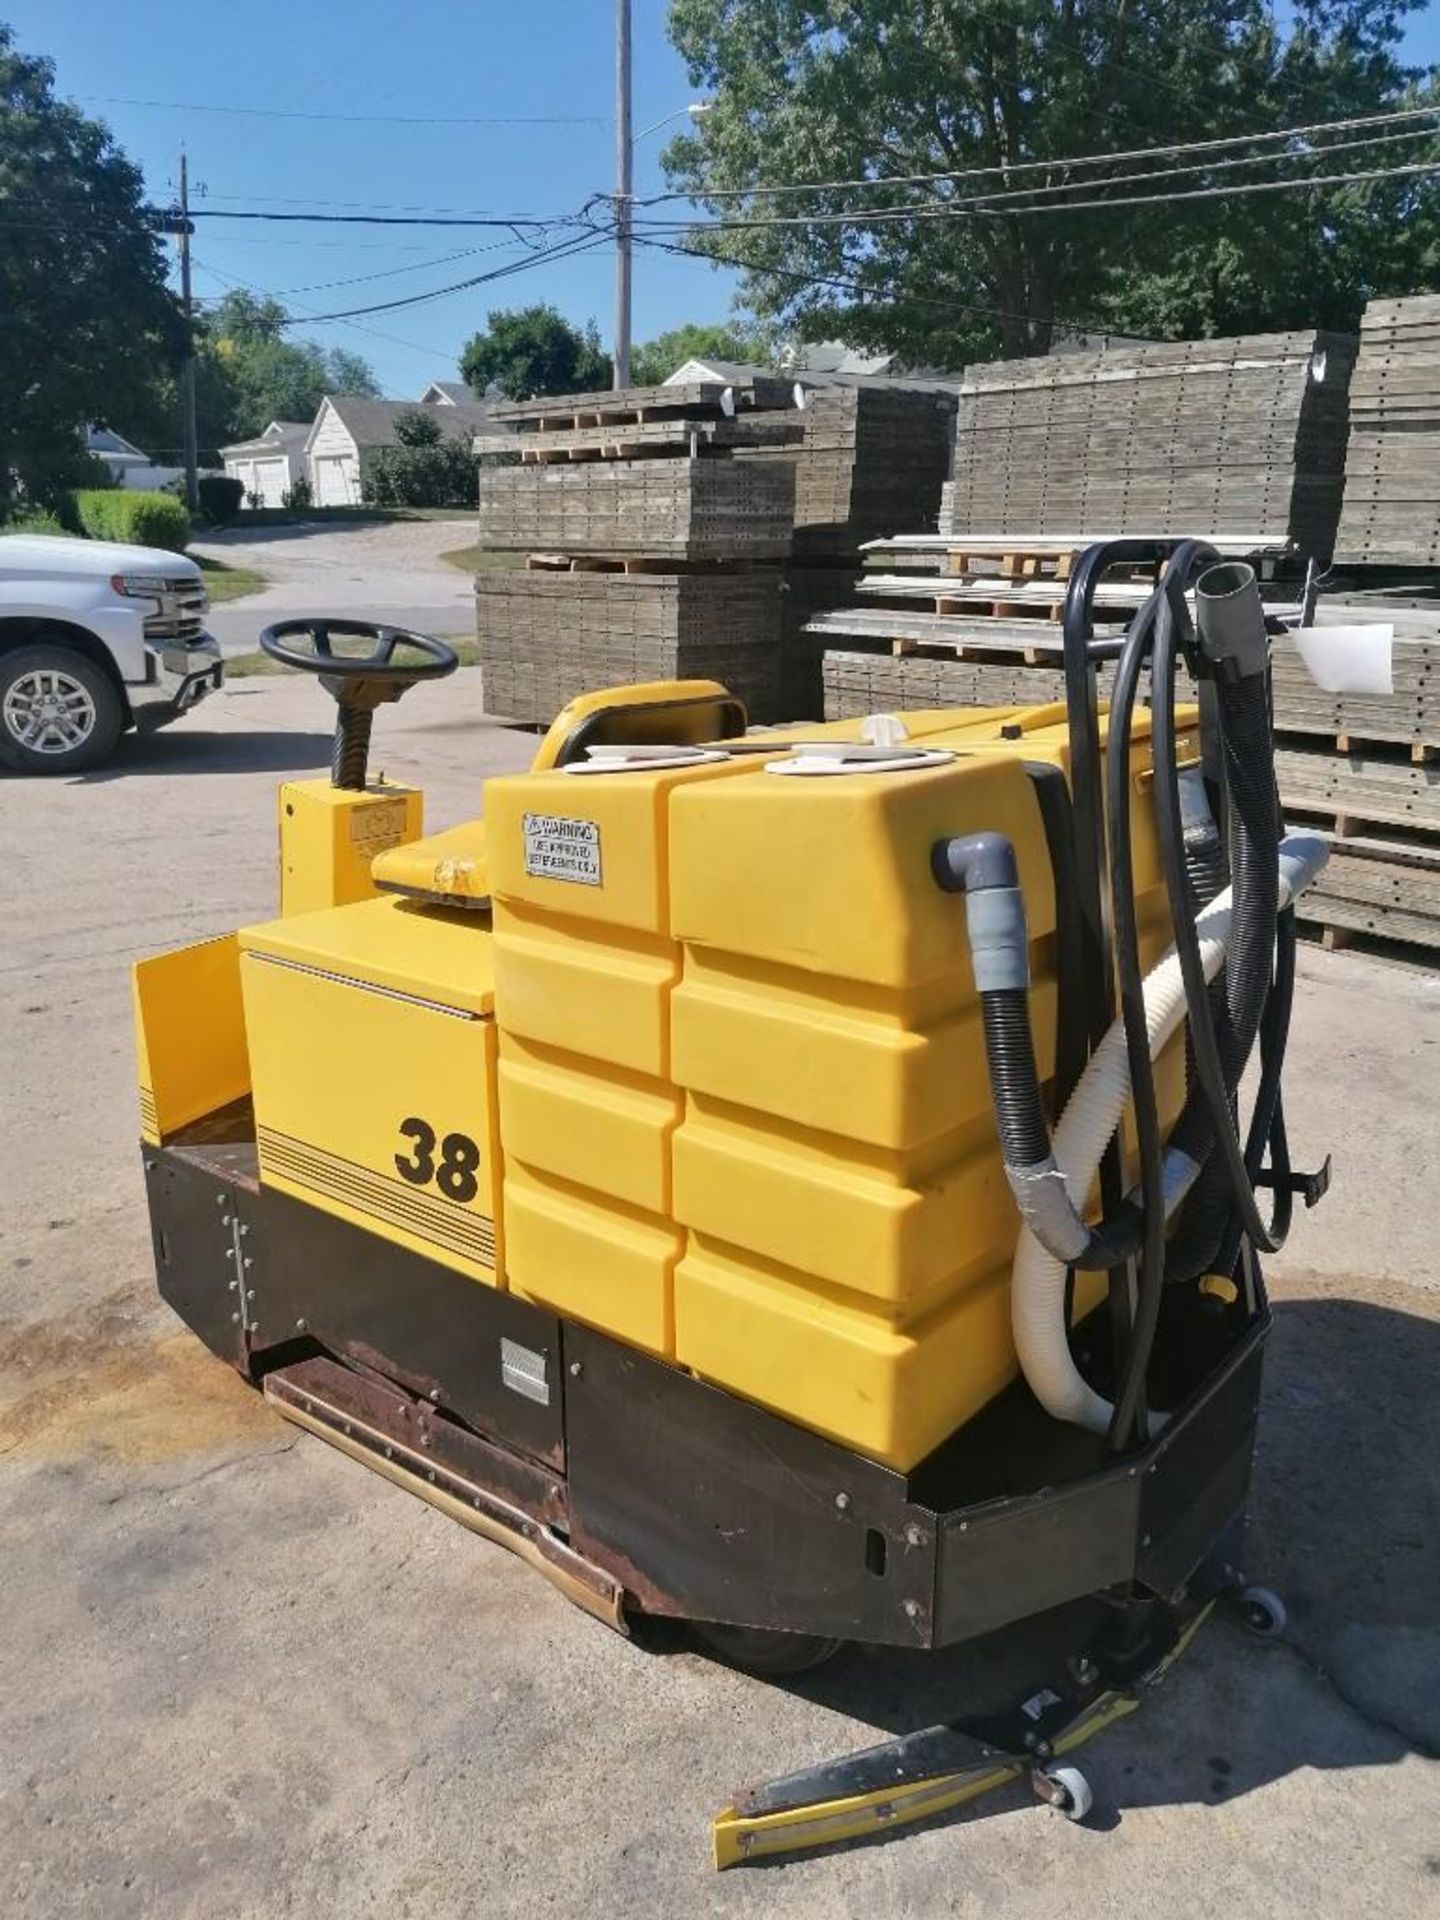 Factory Cat 38 Industrial Sweeper, Serial #JR38-2013, 2059 Hours, Model 38, with R.P.S Corporation - Image 4 of 11